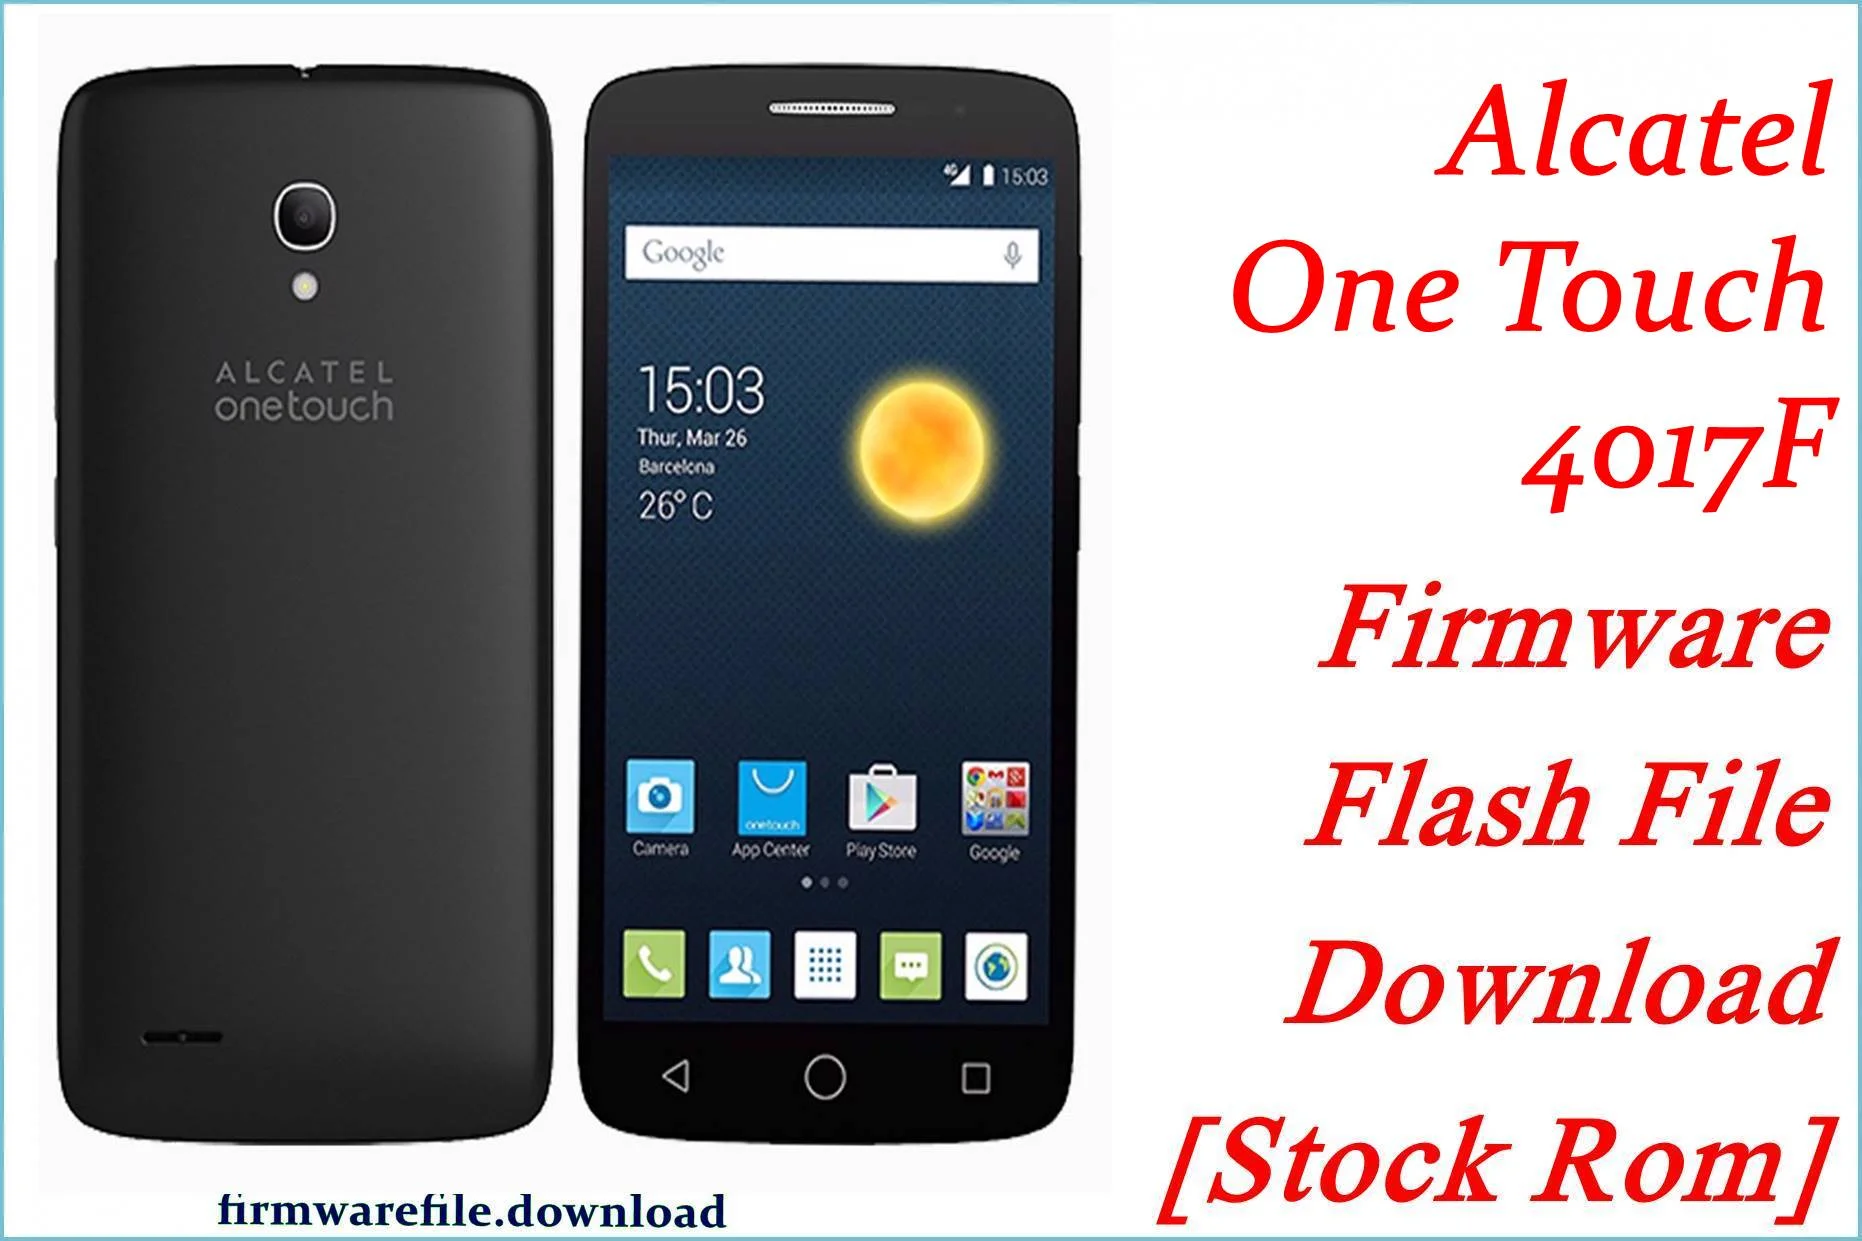 Alcatel One Touch 4017F 1